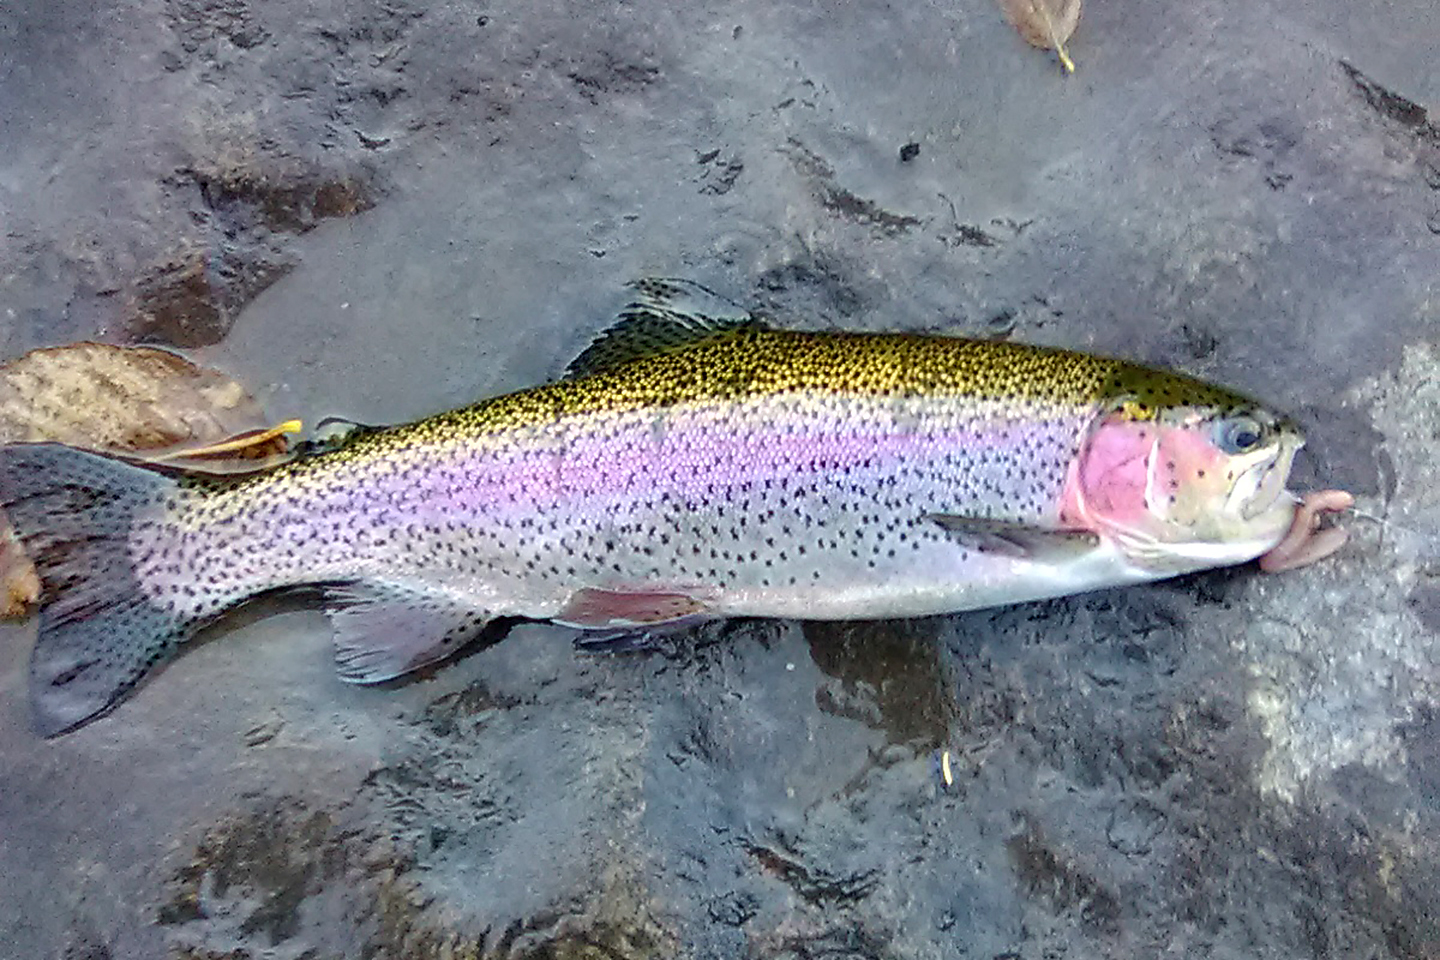 Fall days and tiger trout colors! A huge shout to @lmcgons who